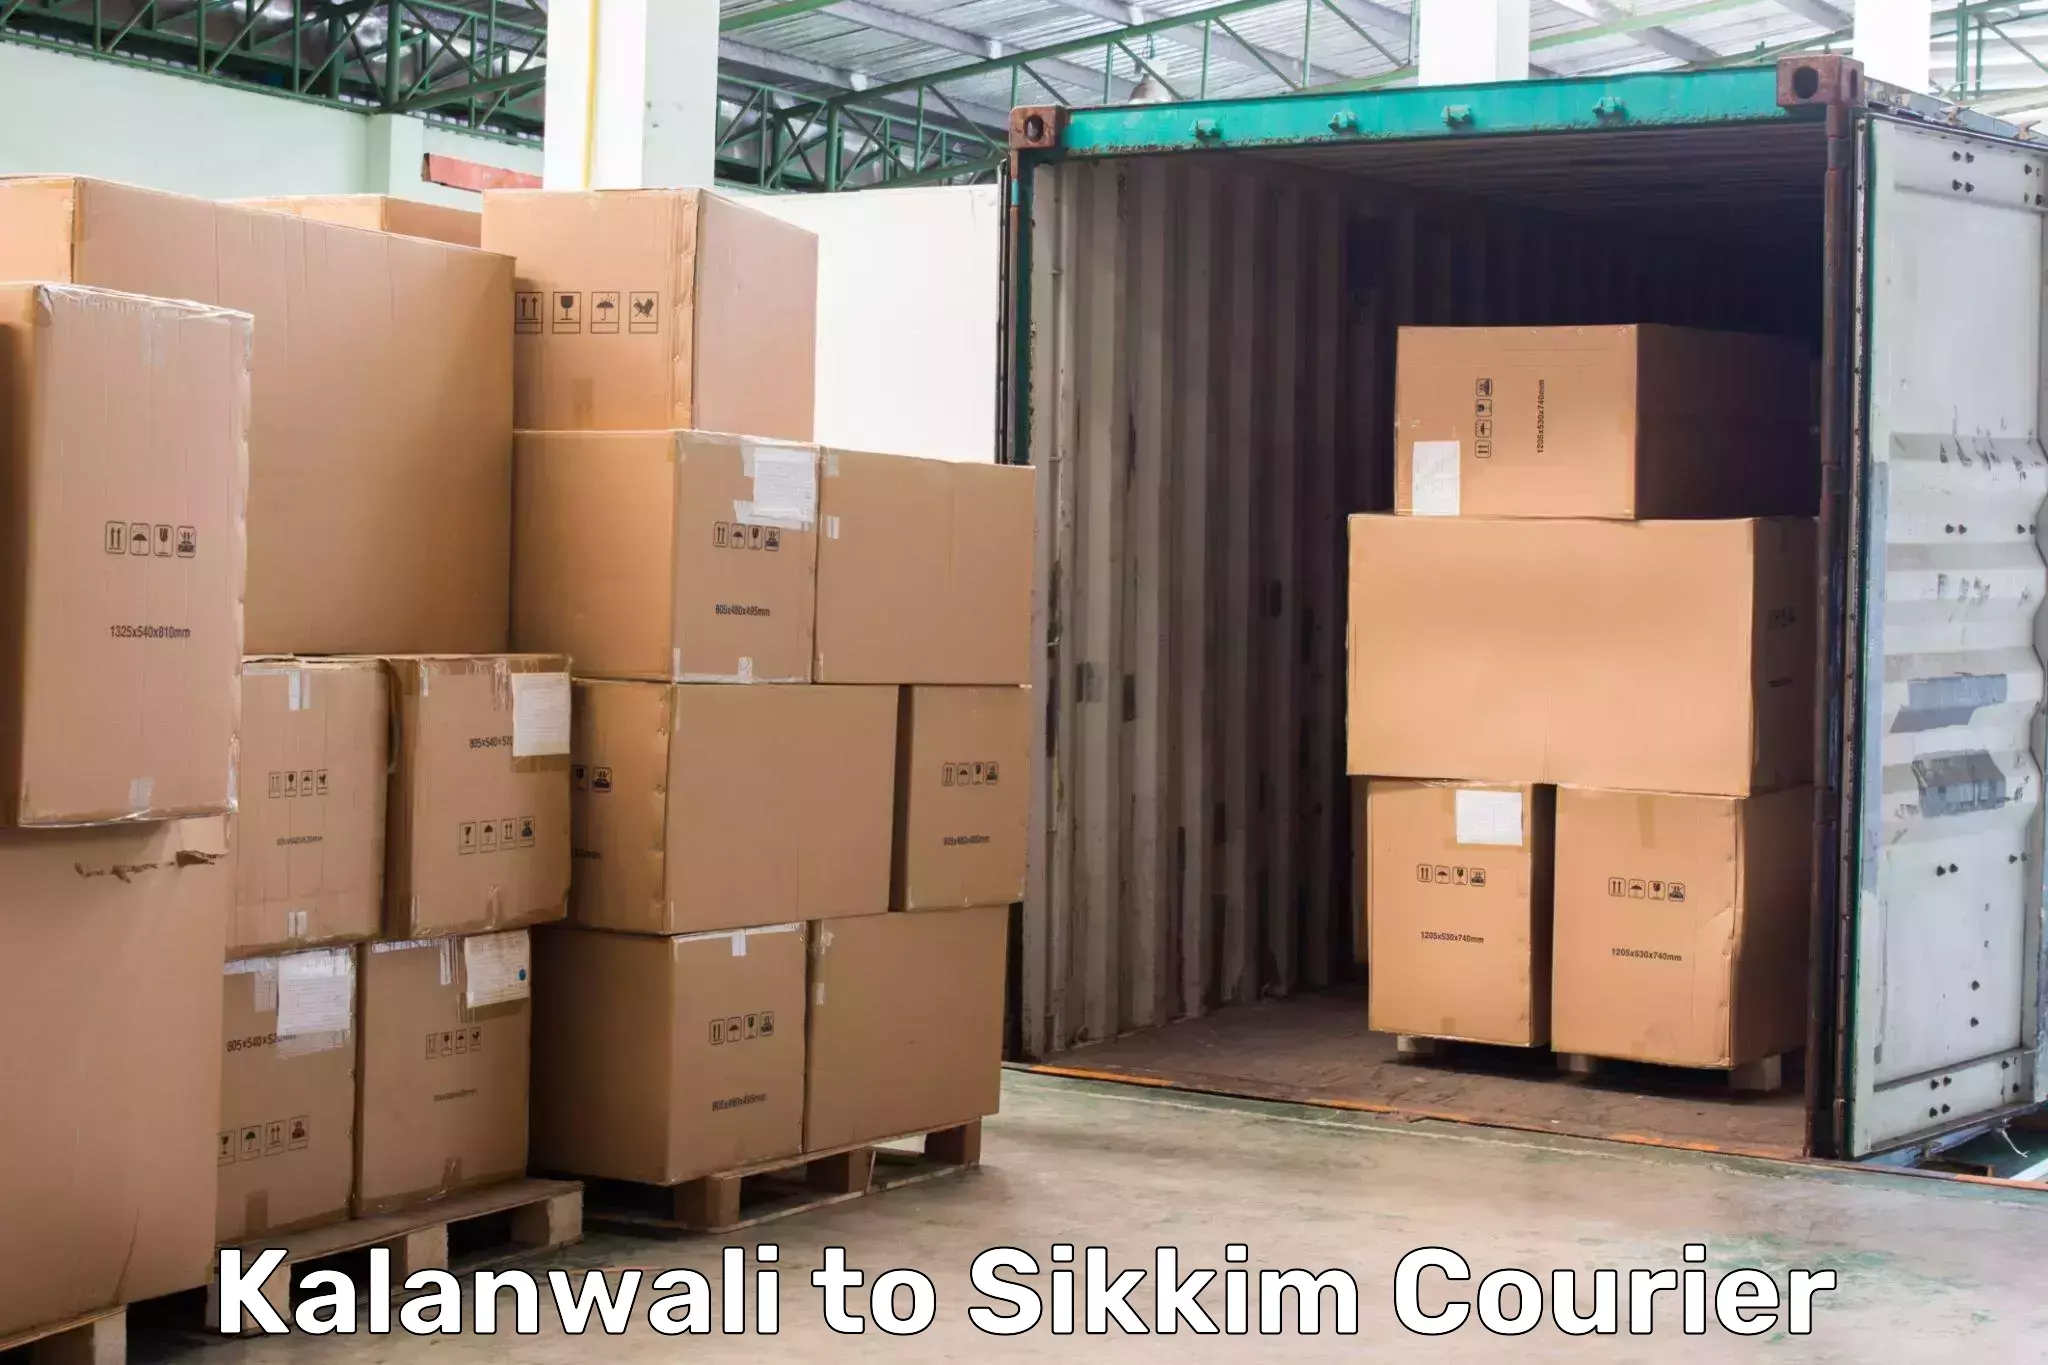 Premium courier solutions Kalanwali to Pelling